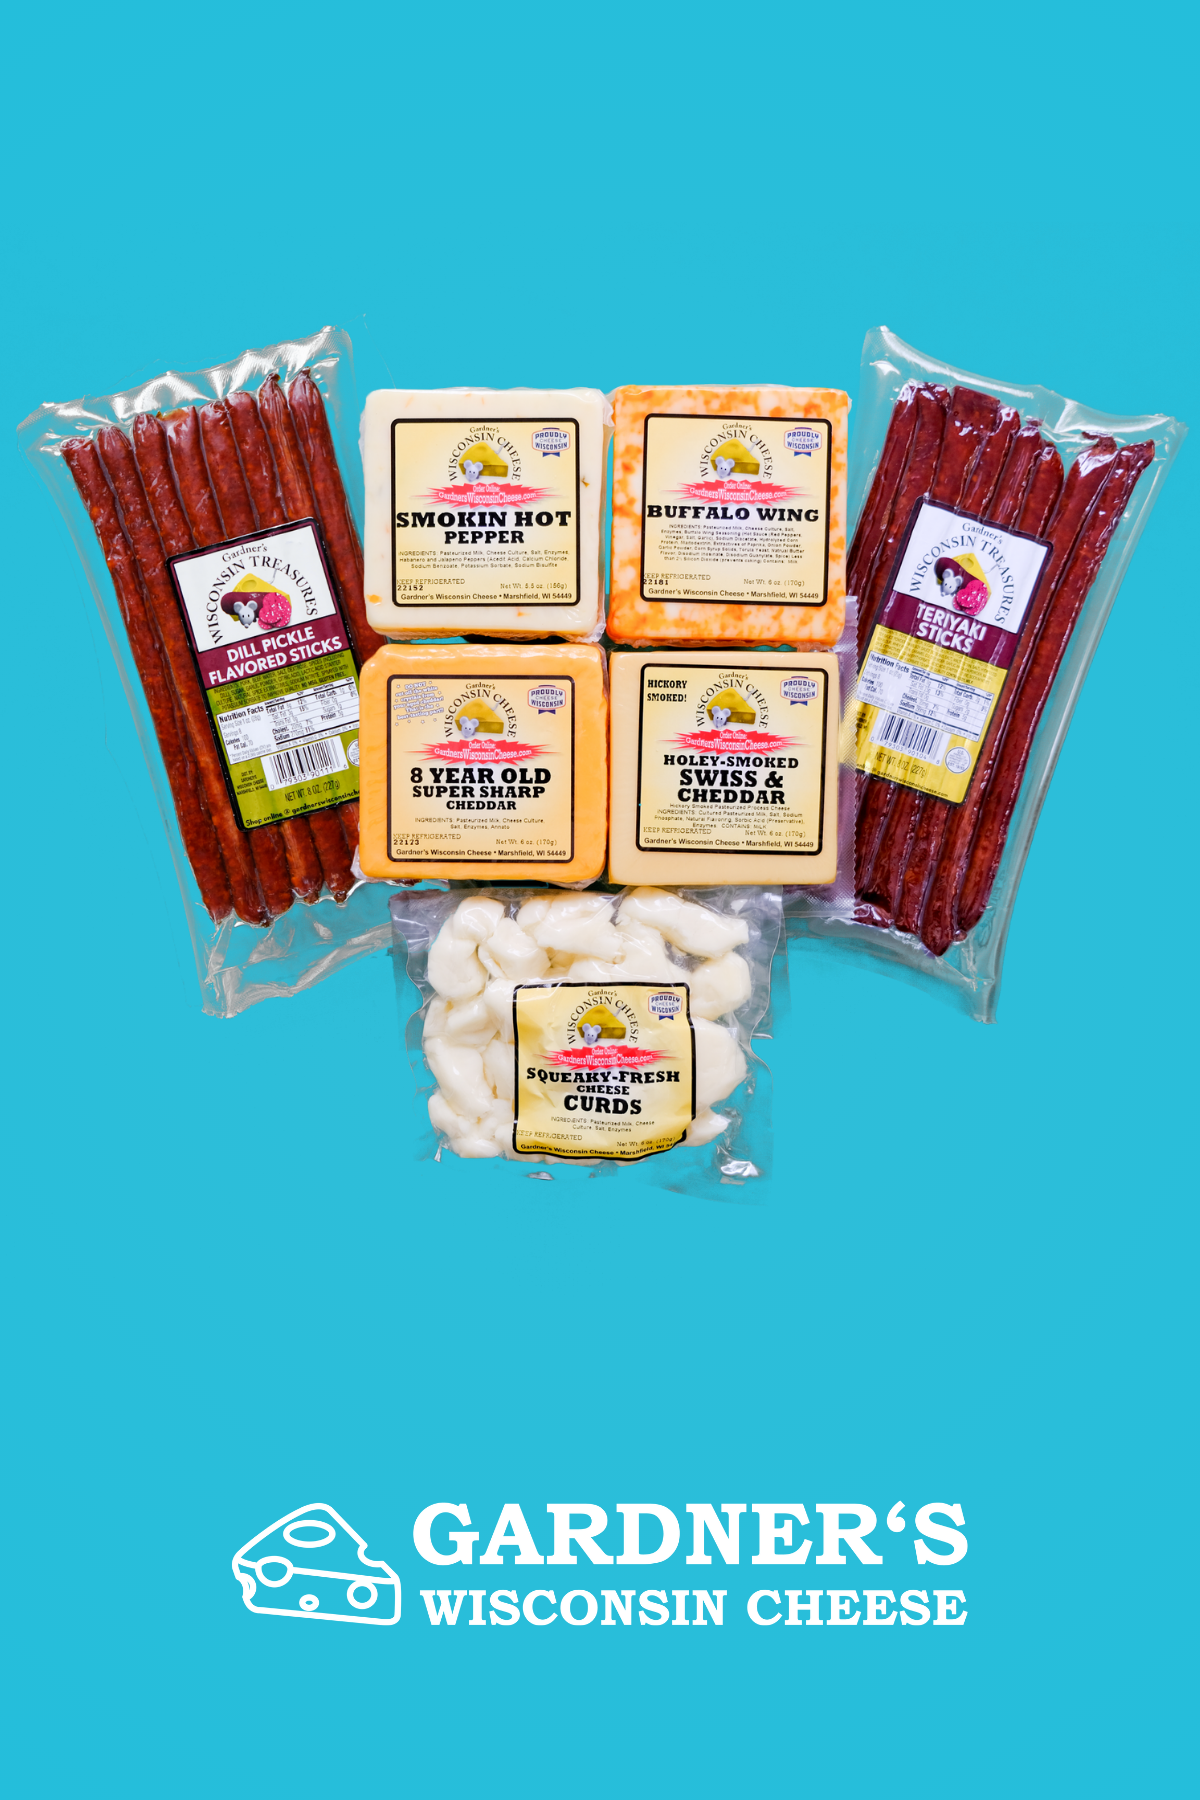 Gameday Package - Gardners Wisconsin Cheese and Sausage